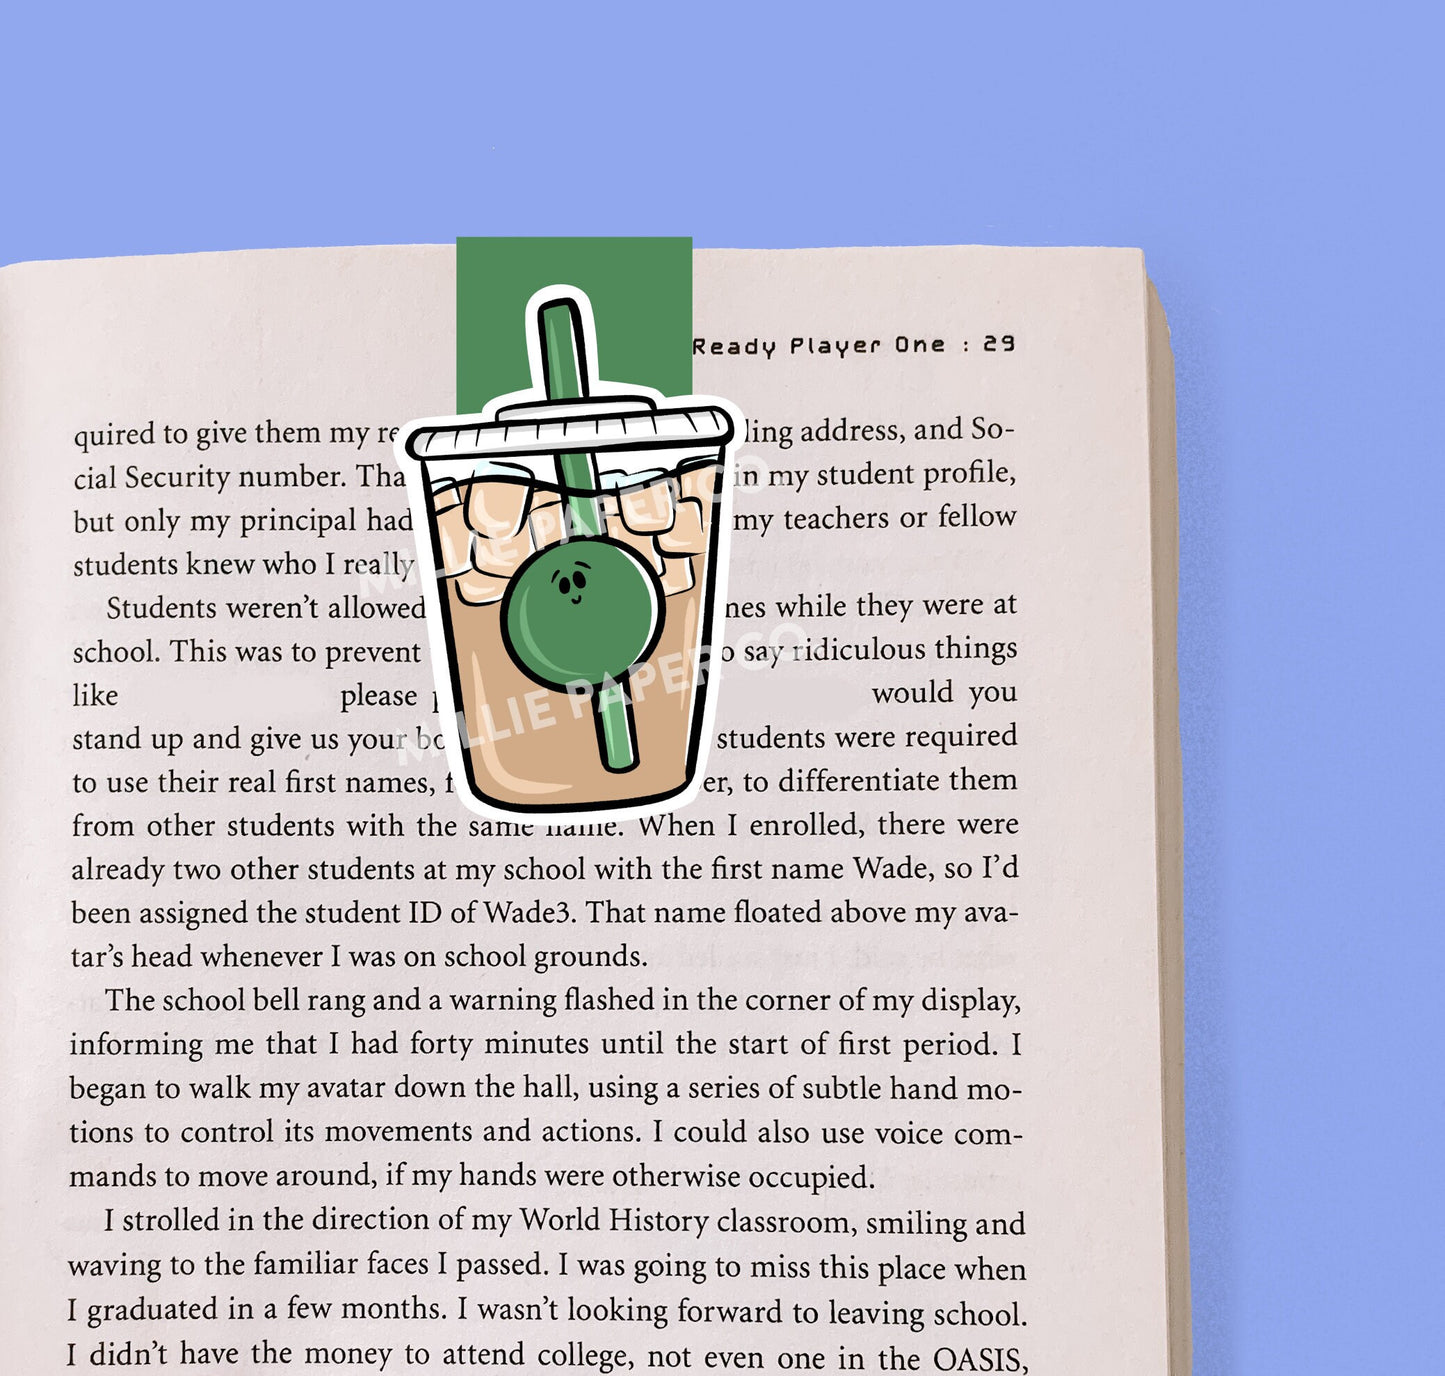 Iced Coffee Magnetic Bookmark